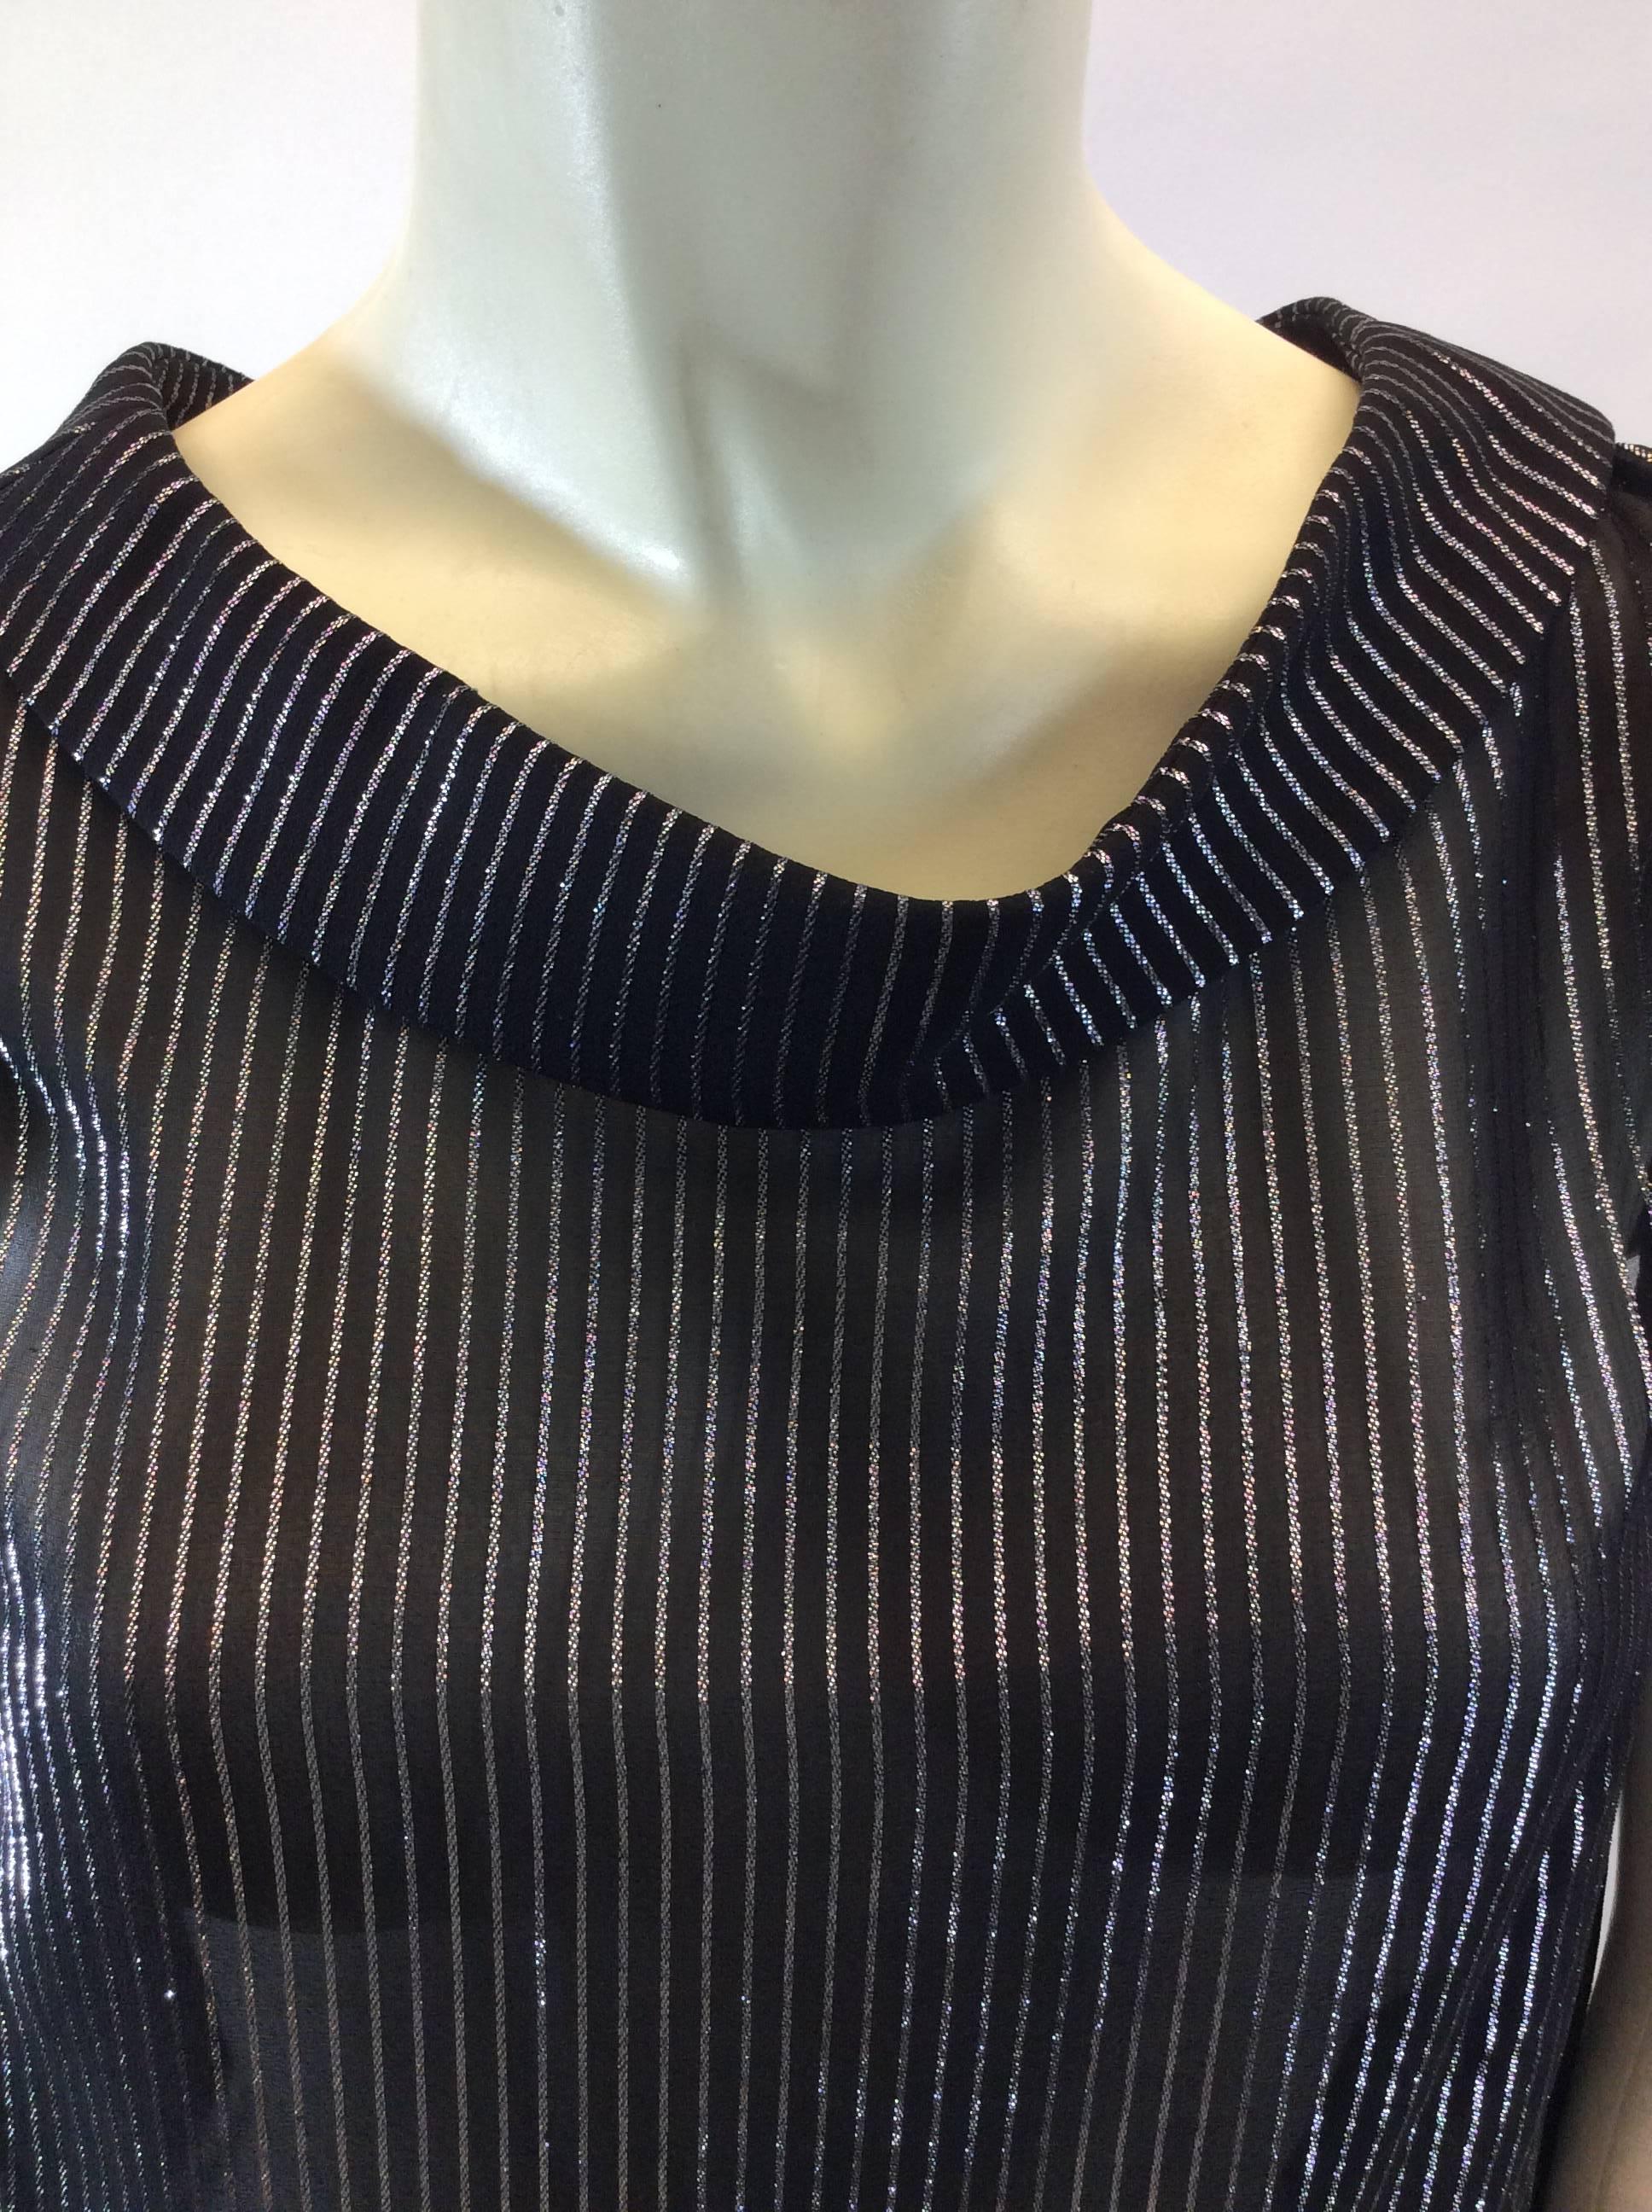 Saint Laurent Black and Silver Silk Blouse NWT For Sale 1